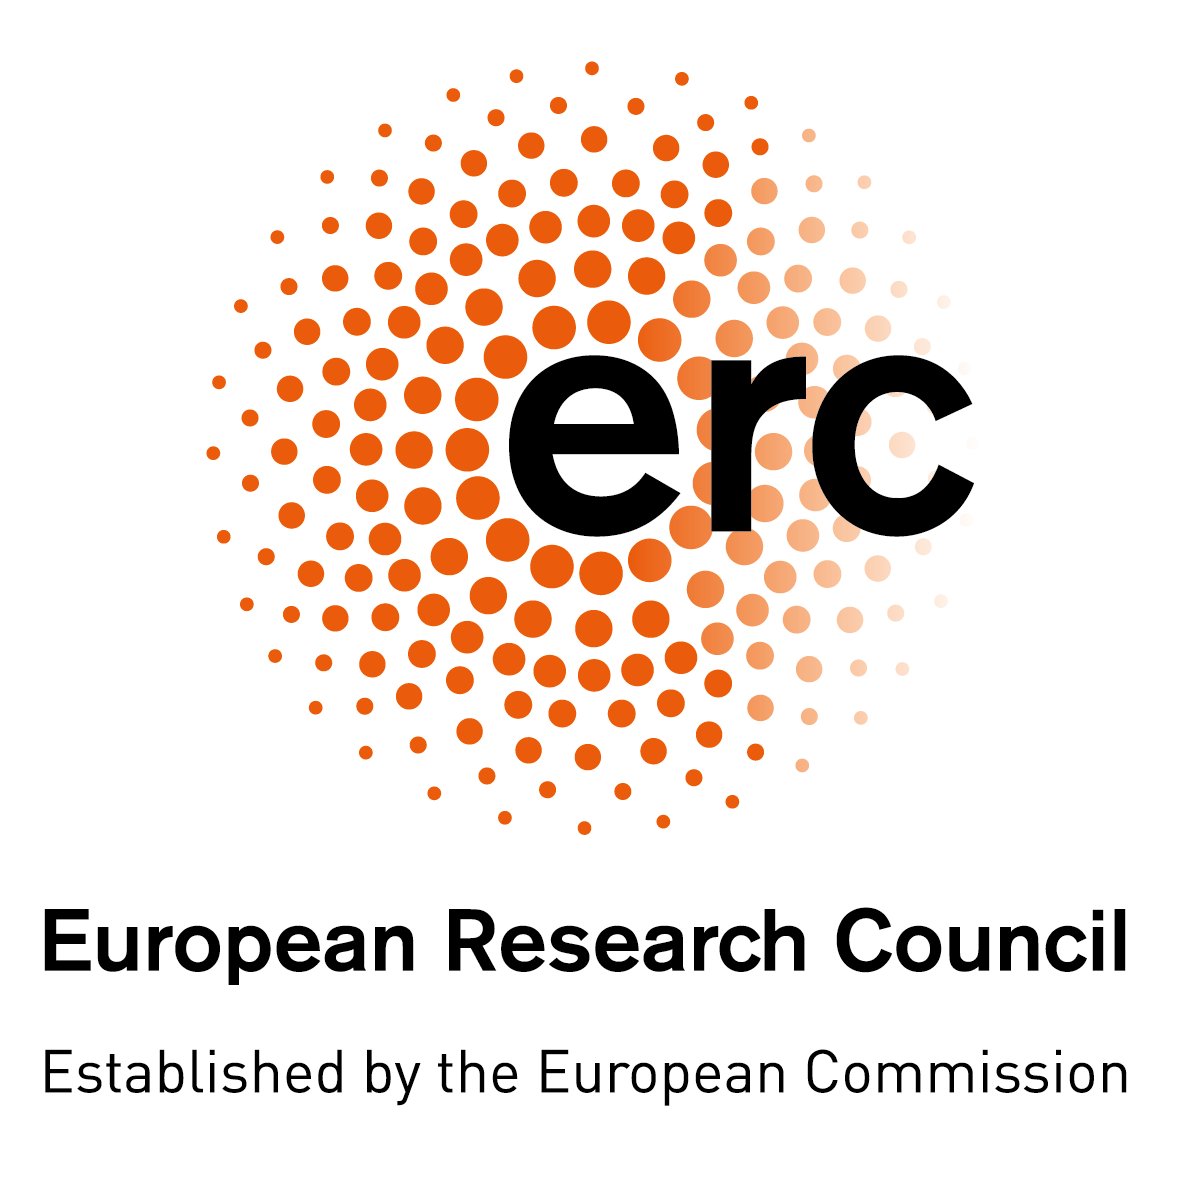 Know anyone interested in doing a PhD on Wastewater Process Engineering? Full funding from @ERC_Research for candidates of any nationality. Please share this link or RT nature.com/naturecareers/… #wastewater #PhDposition